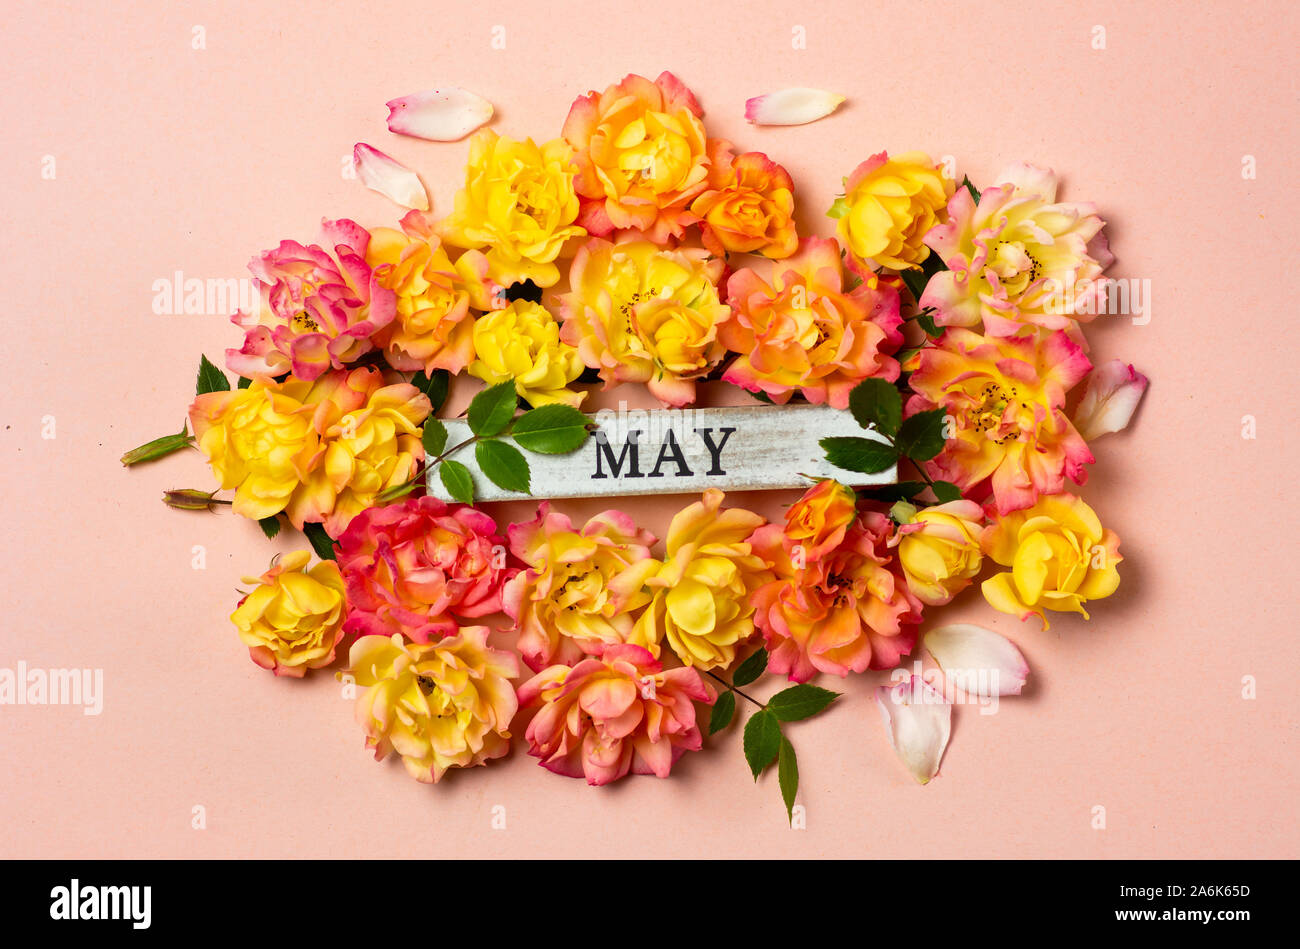 Month of may abstract card with yellow and orange roses on pastel background Stock Photo